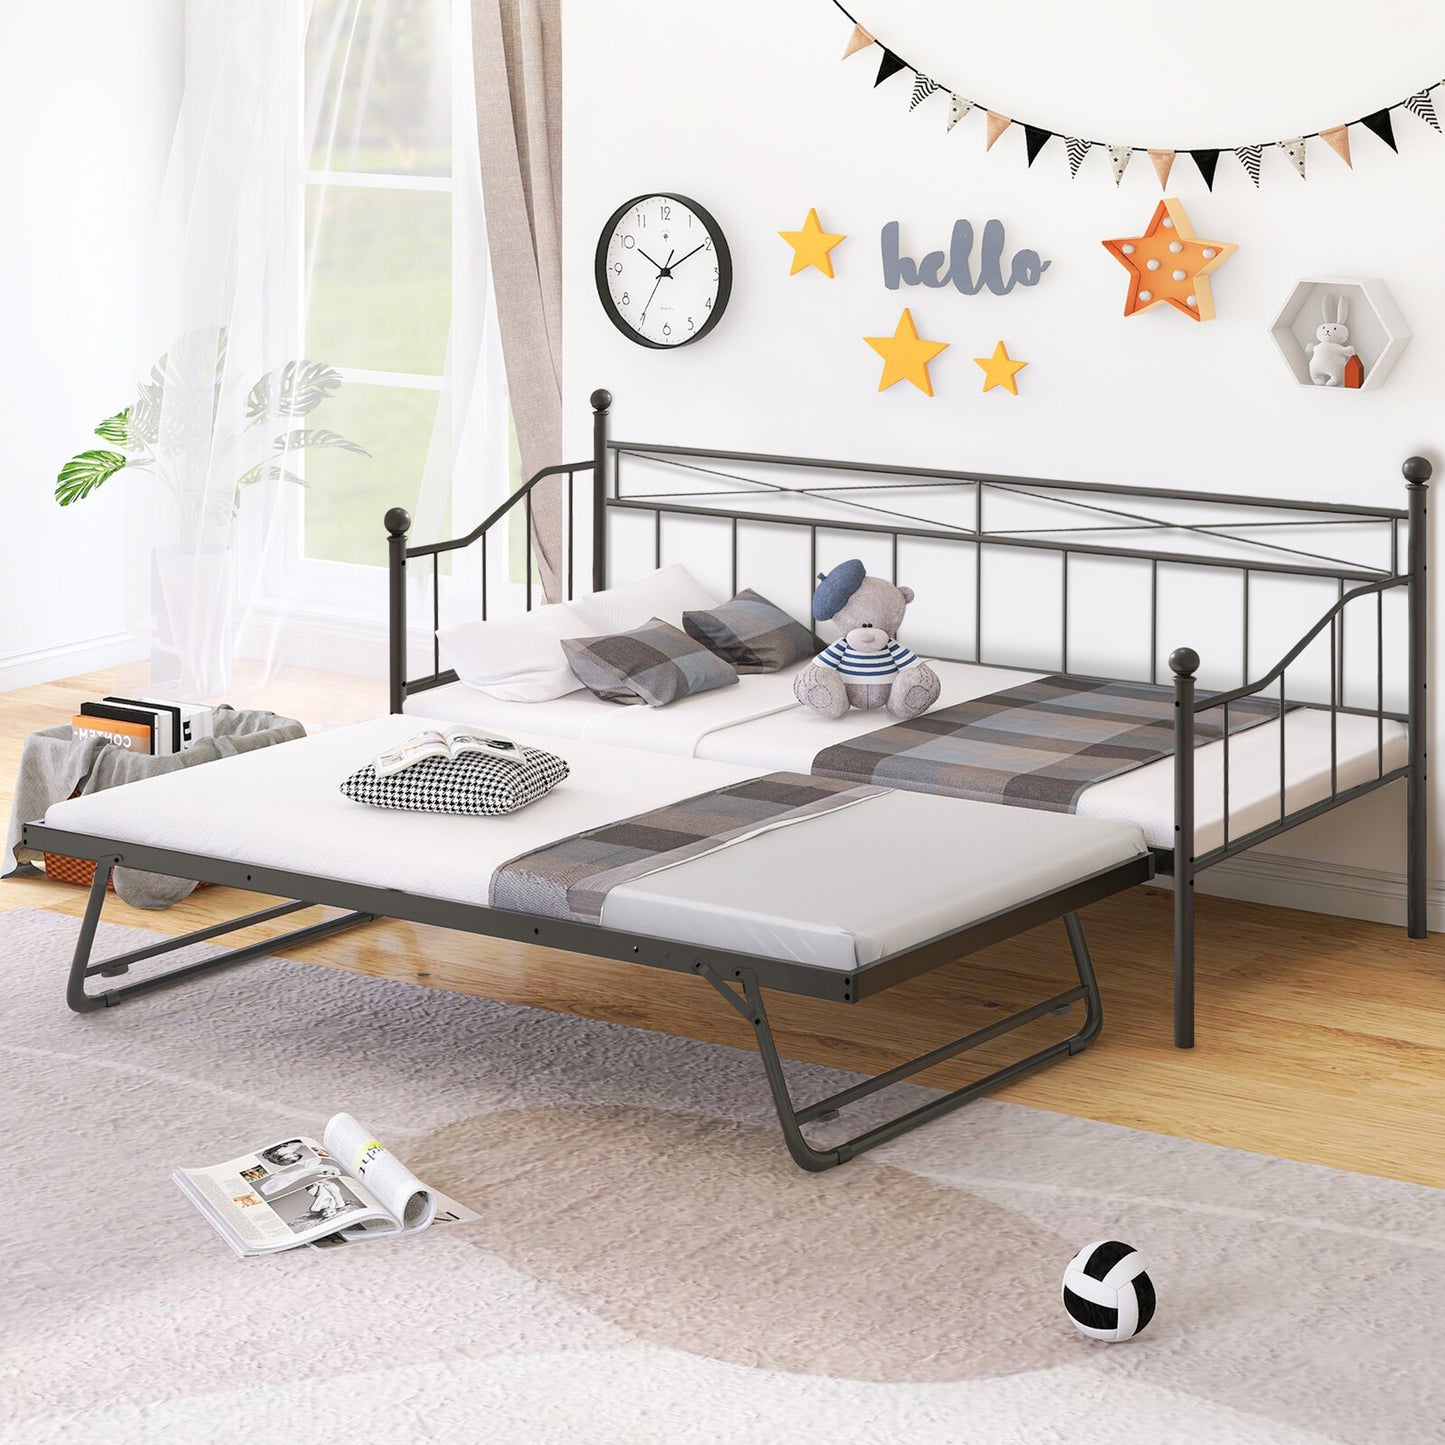 SYNGAR Daybed with Trundle, Metal Twin Daybed for Living Room/Bedroom, Twin Size Sofa Bed with Pop Up Trundle, Space Saving Design, Modern Home Platform Bed Frame, No Box Spring Needed, Black, D6610